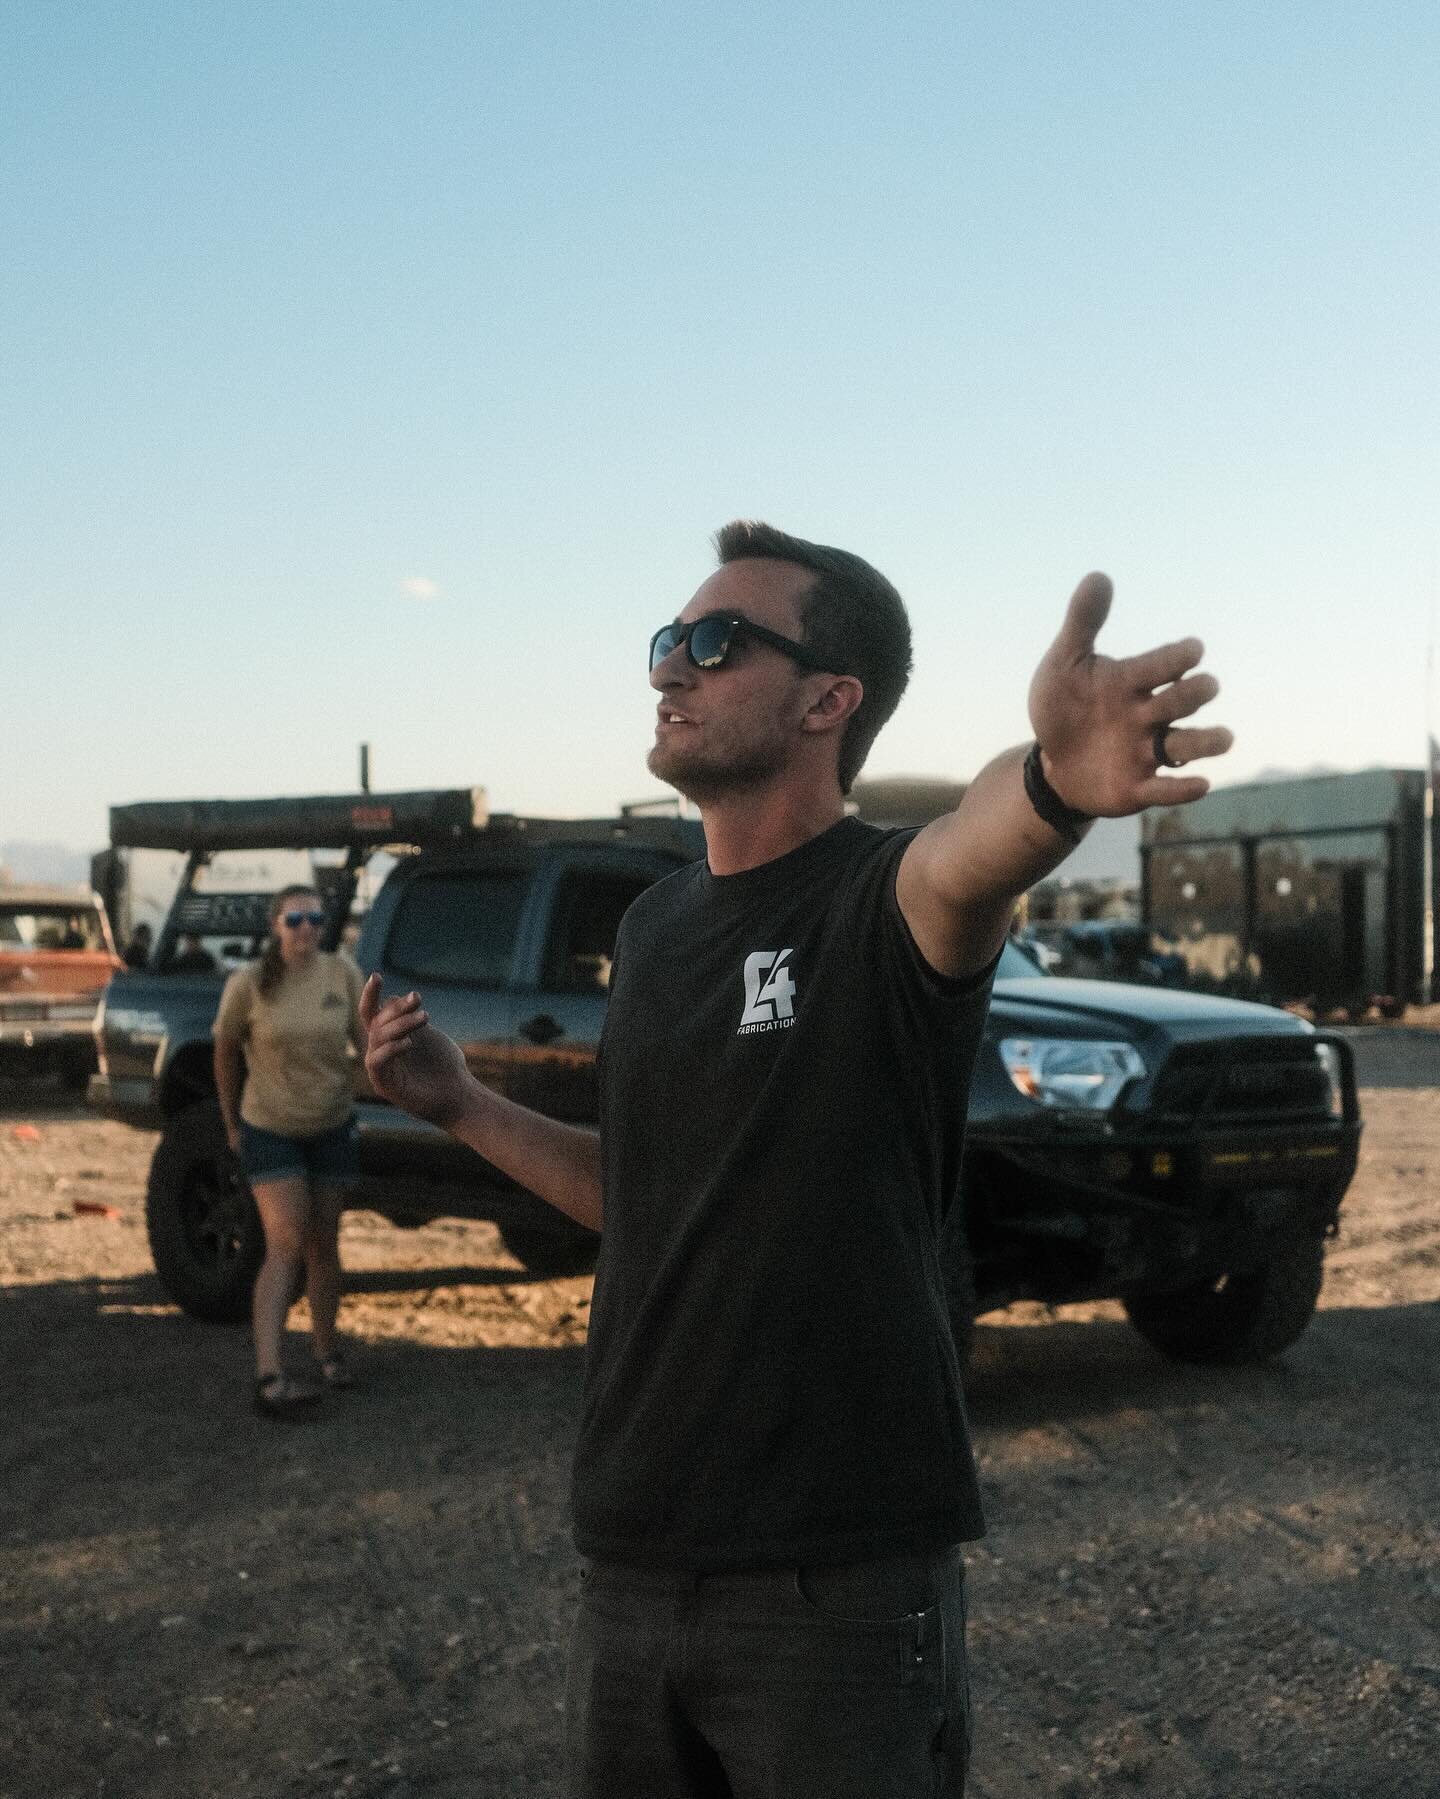 Wishing a Happy Birthday to Crew Pit Master, Pit Daddy Hayden aka @derpiful.

We are celebrating out here in the Lake Bed with Funfetti Pancakes.

Thank you for all your hard work and dedication to the Sherpa Motorsports Team!

______________________